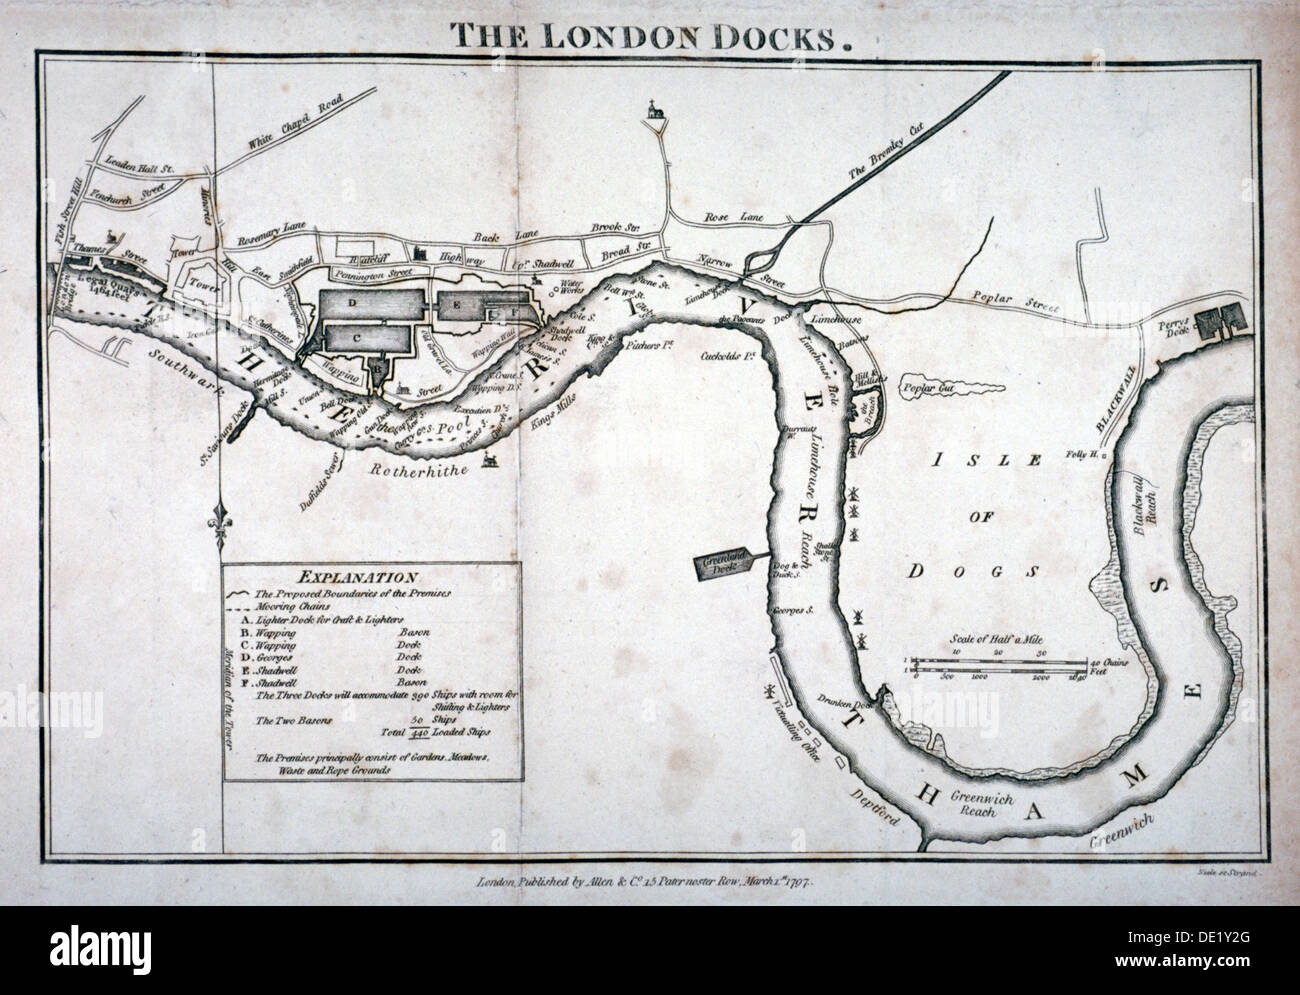 Plan of the River Thames showing the London Docks and the Isle of Dogs, 1797 Artist: Anon Stock Photo